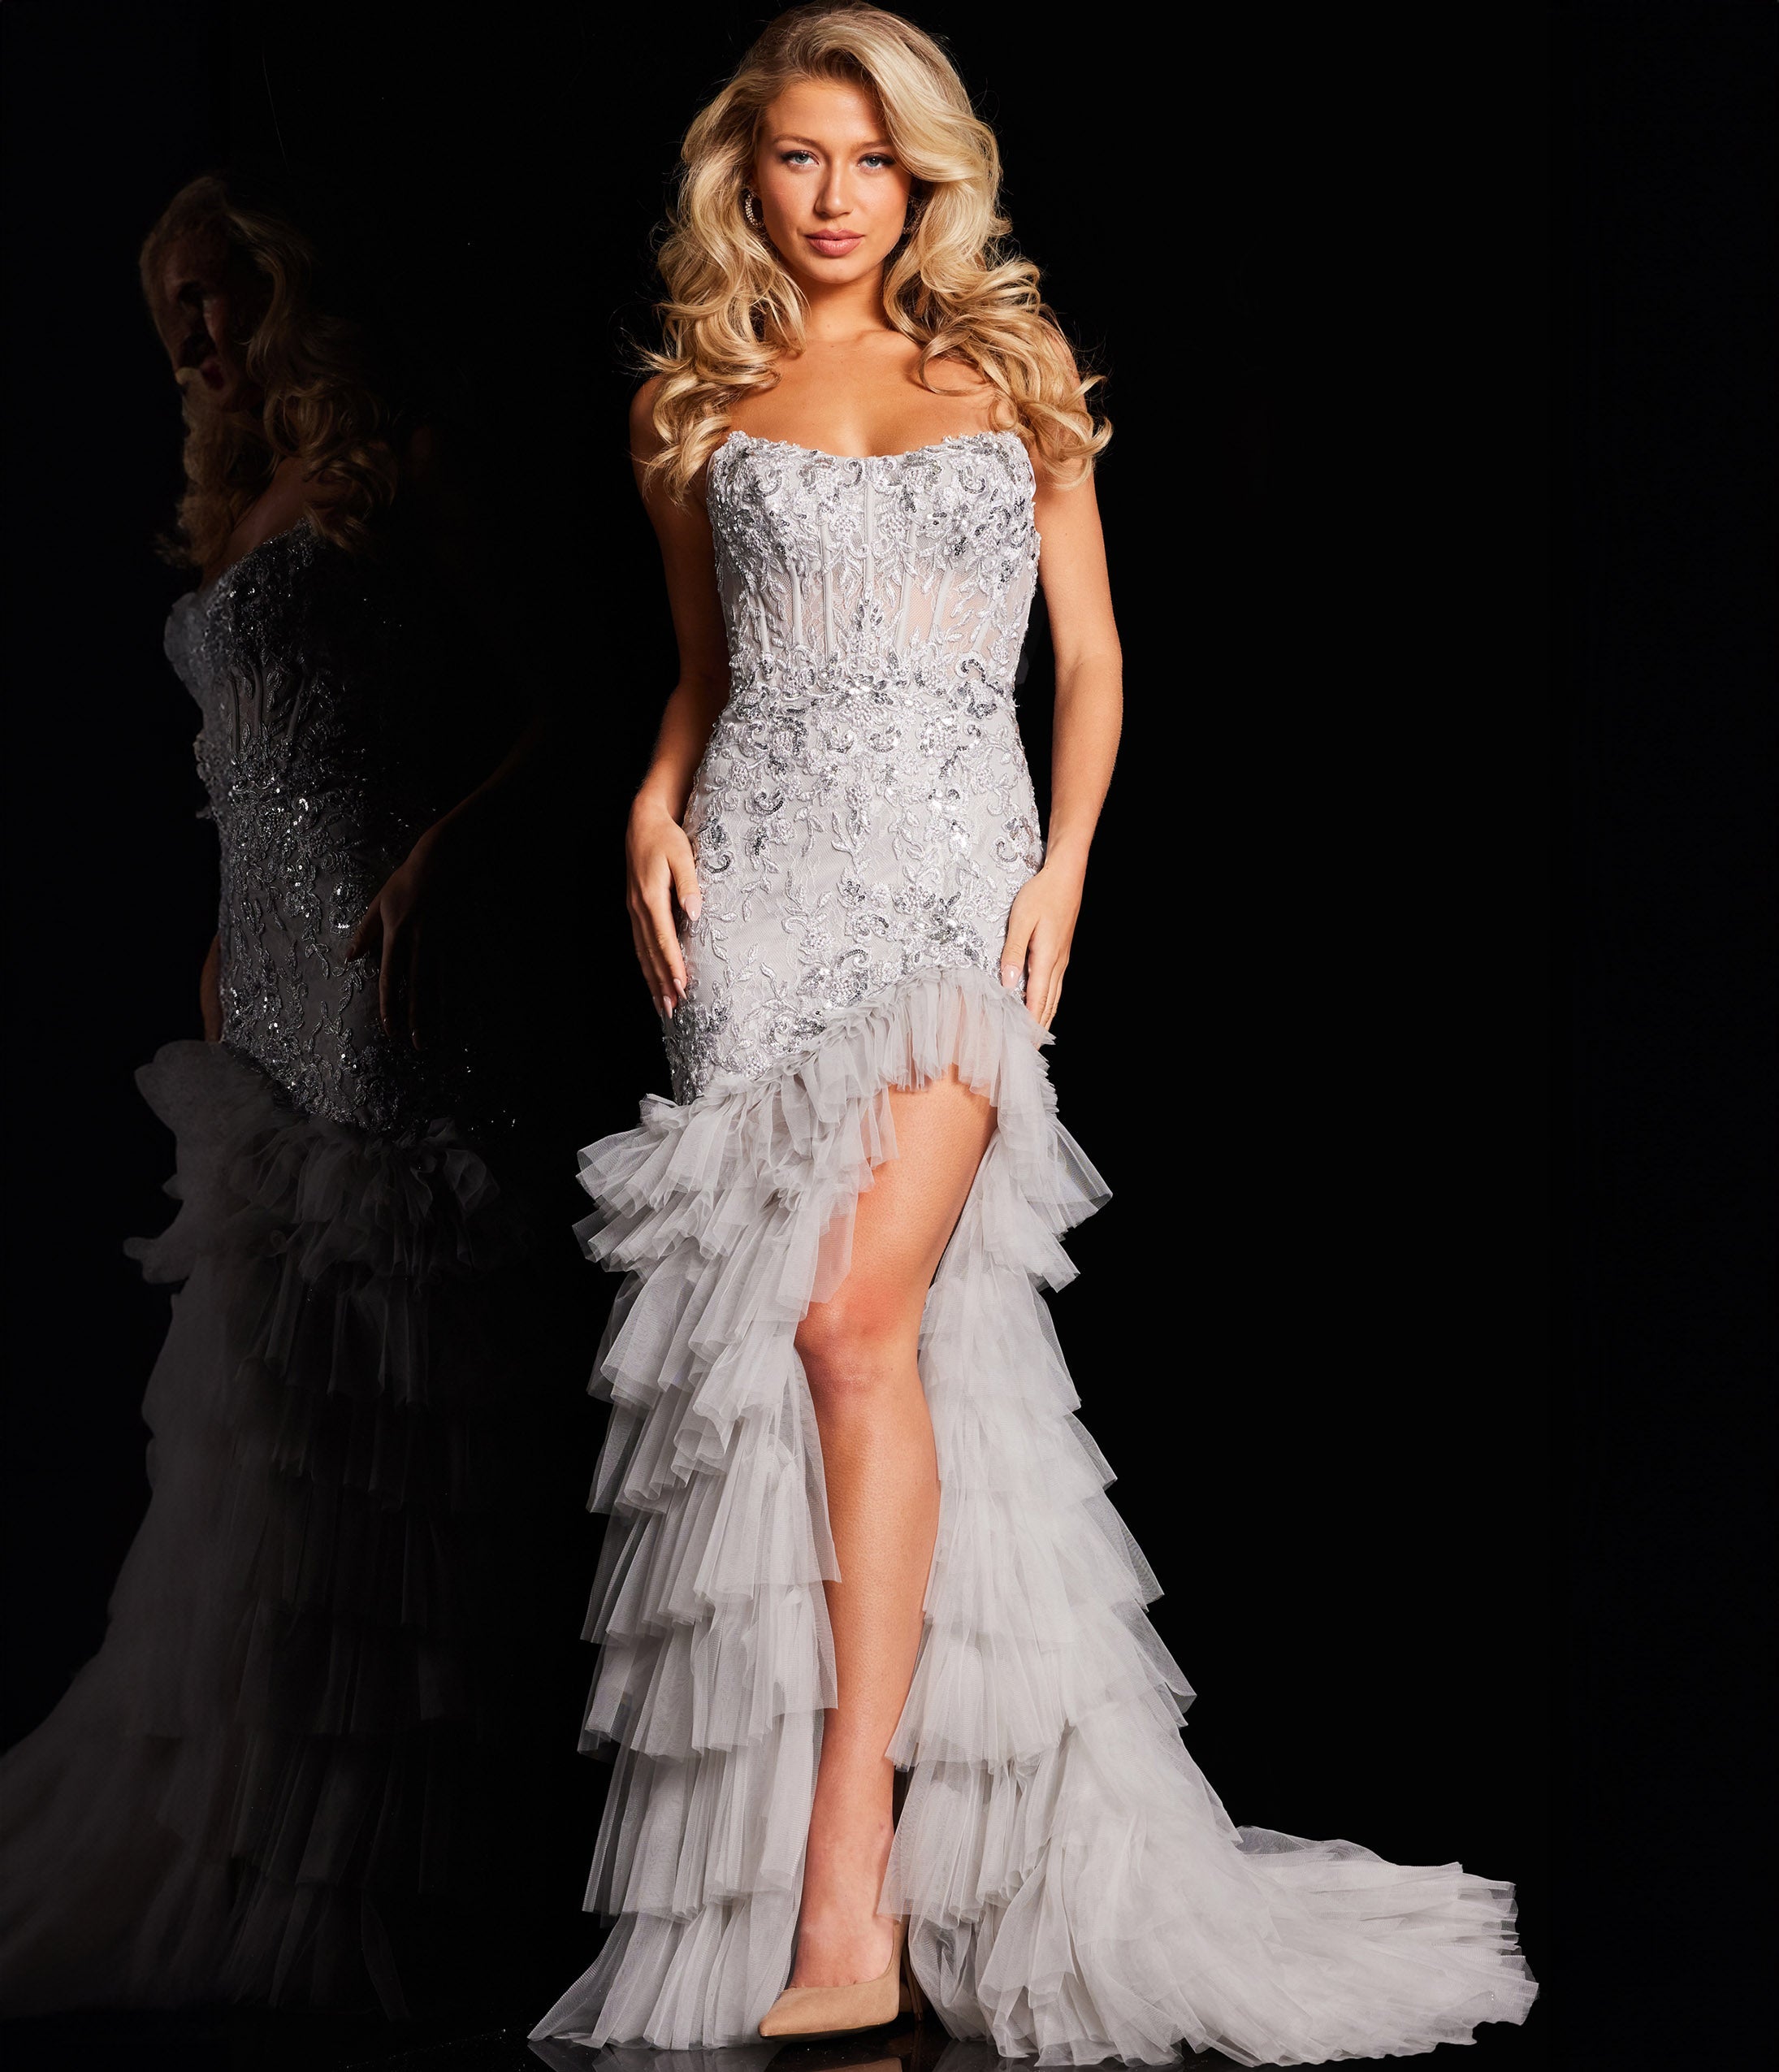 

Jovani Silver Embroidered Corset & Ruffle Fringe Tiered Prom Dress